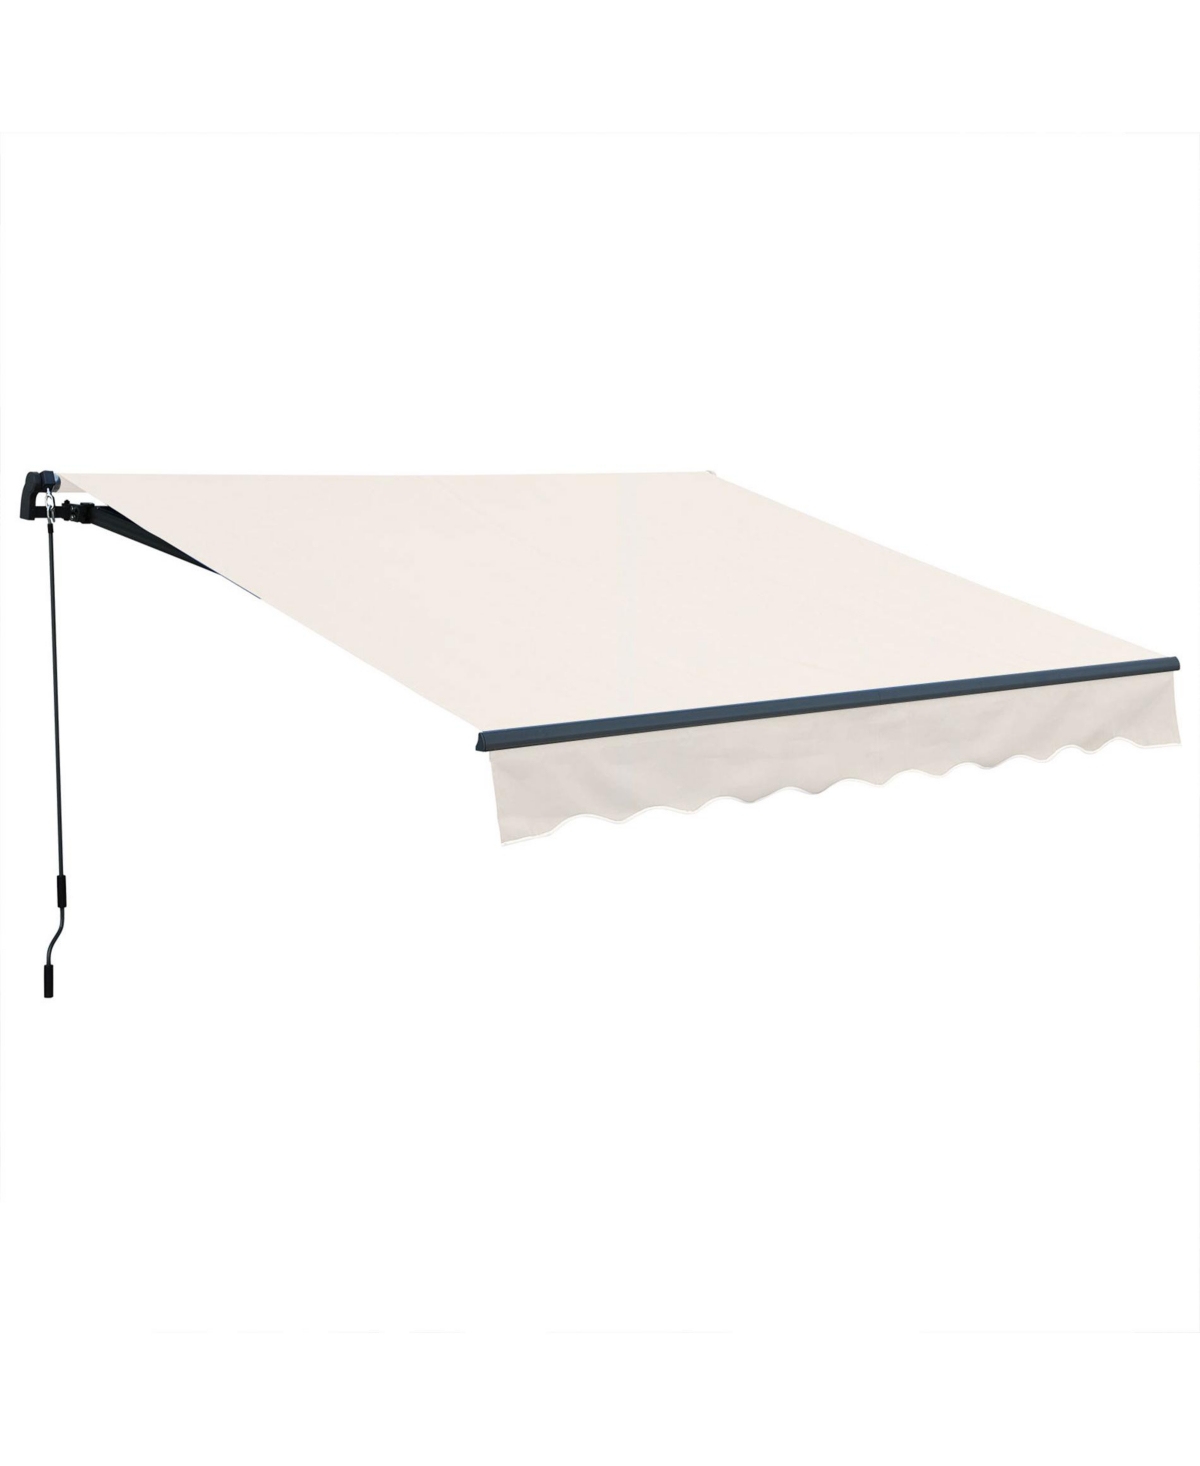 12'x 8' x 5' Retractable Window Awning Sunshade Shelter,Polyester Fabric,with Retractable Brackets and Three Wall Bases,fit for Yard, Patio, Do